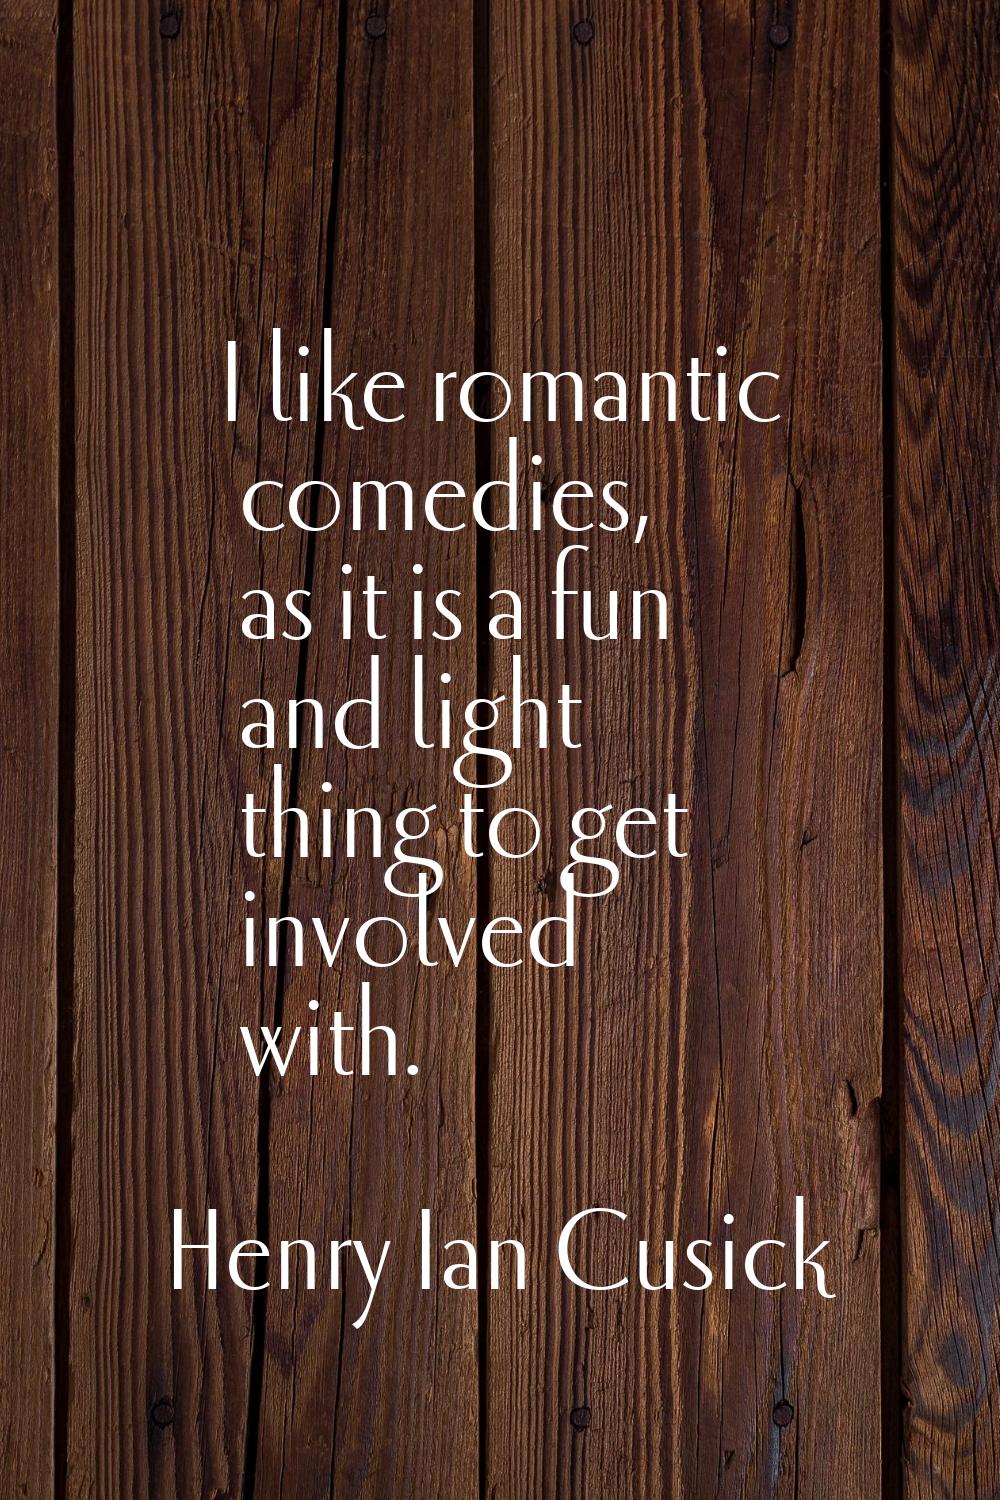 I like romantic comedies, as it is a fun and light thing to get involved with.